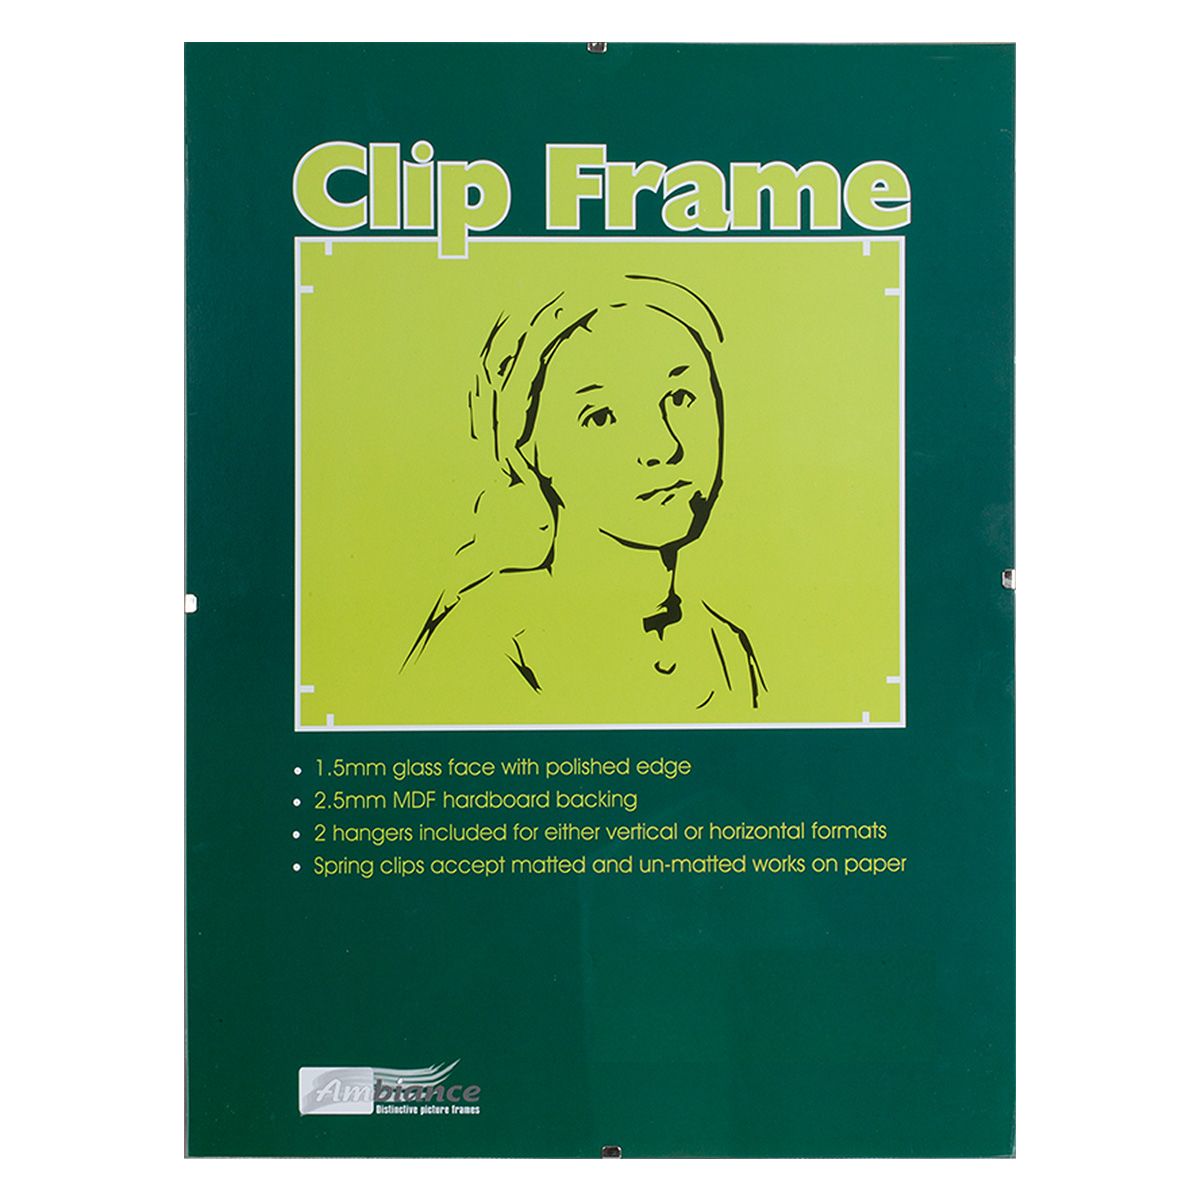 Ambiance Gallery Clip Frame, 9"x12"